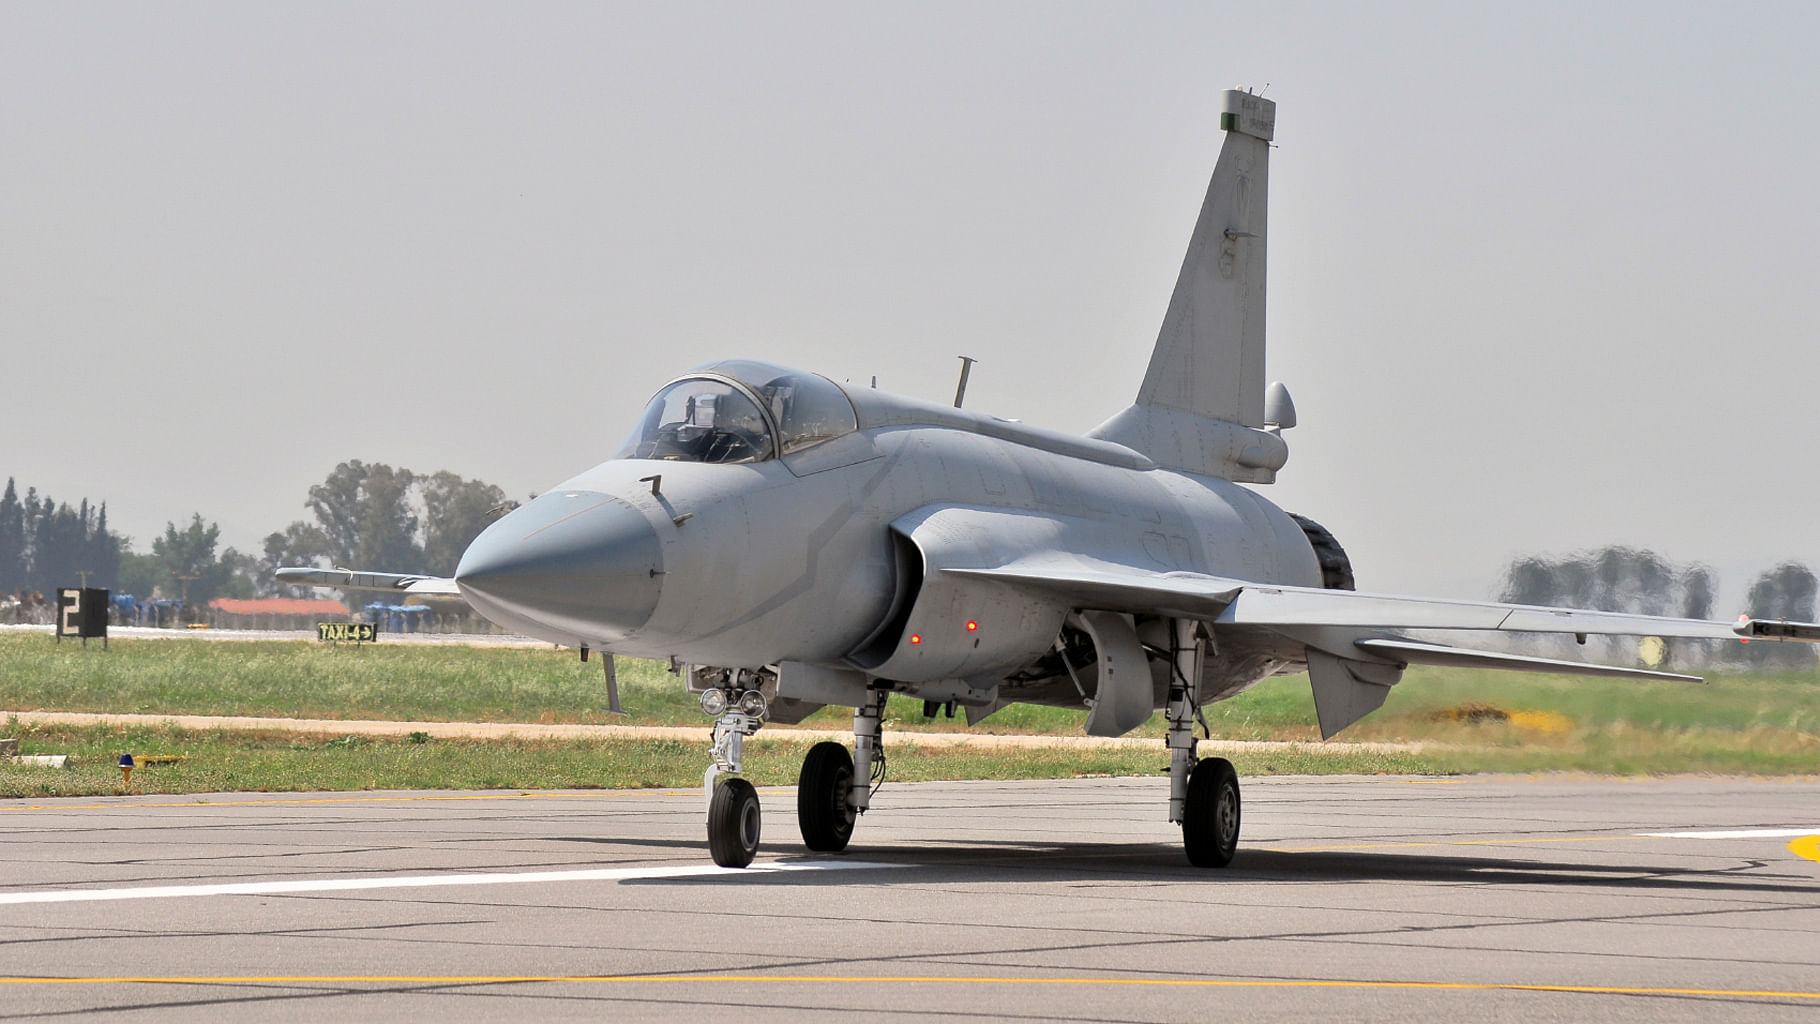 File photo of a F-16 fighter jet. (Photo: iStockphoto)